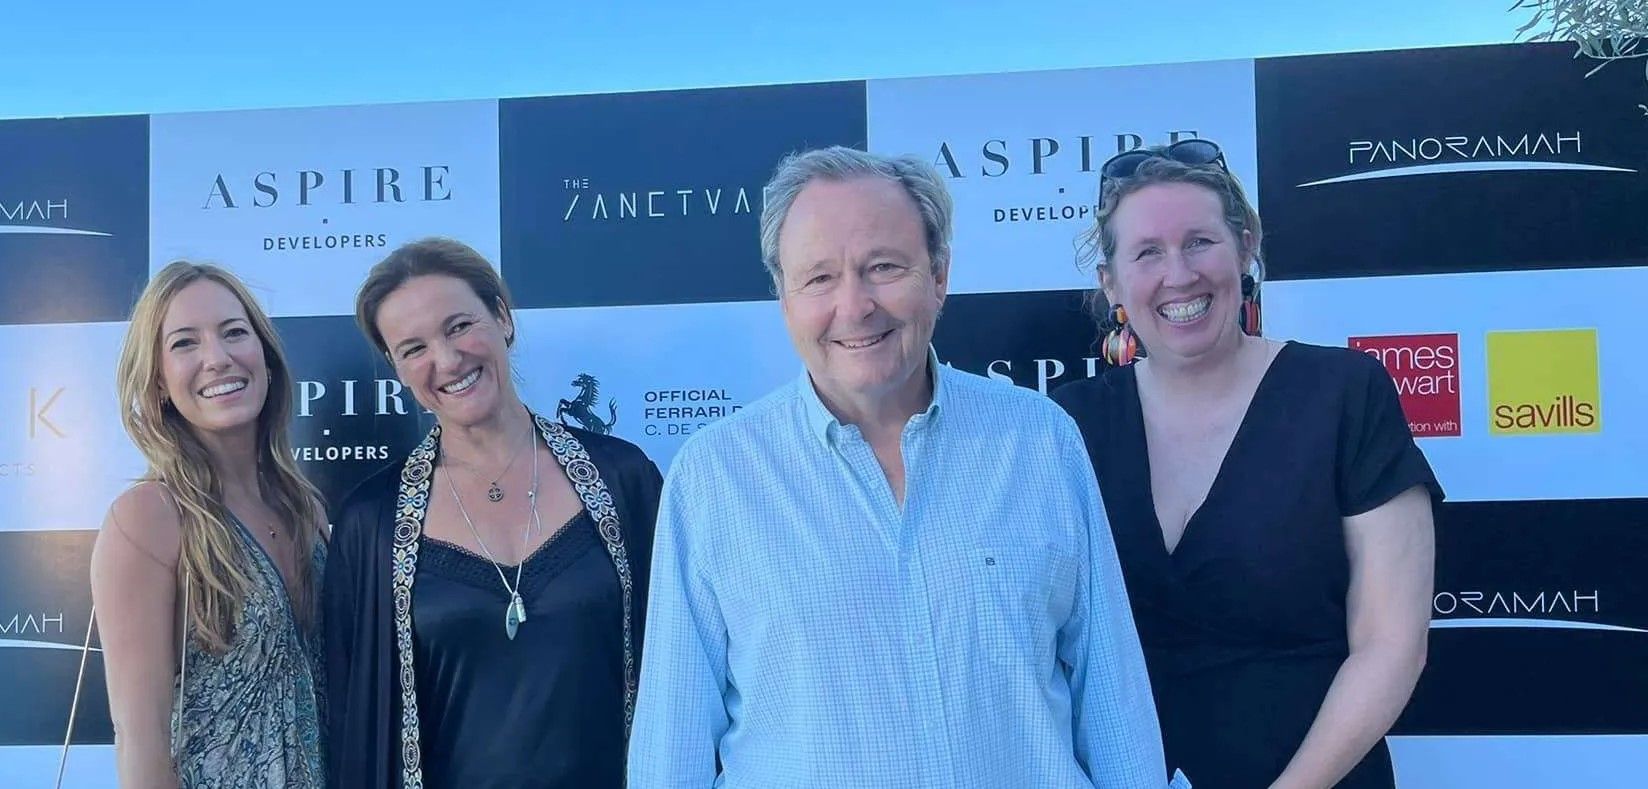 Celebrating Our 25th Anniversary: A Journey with James Stewart and Savills in Sotogrande